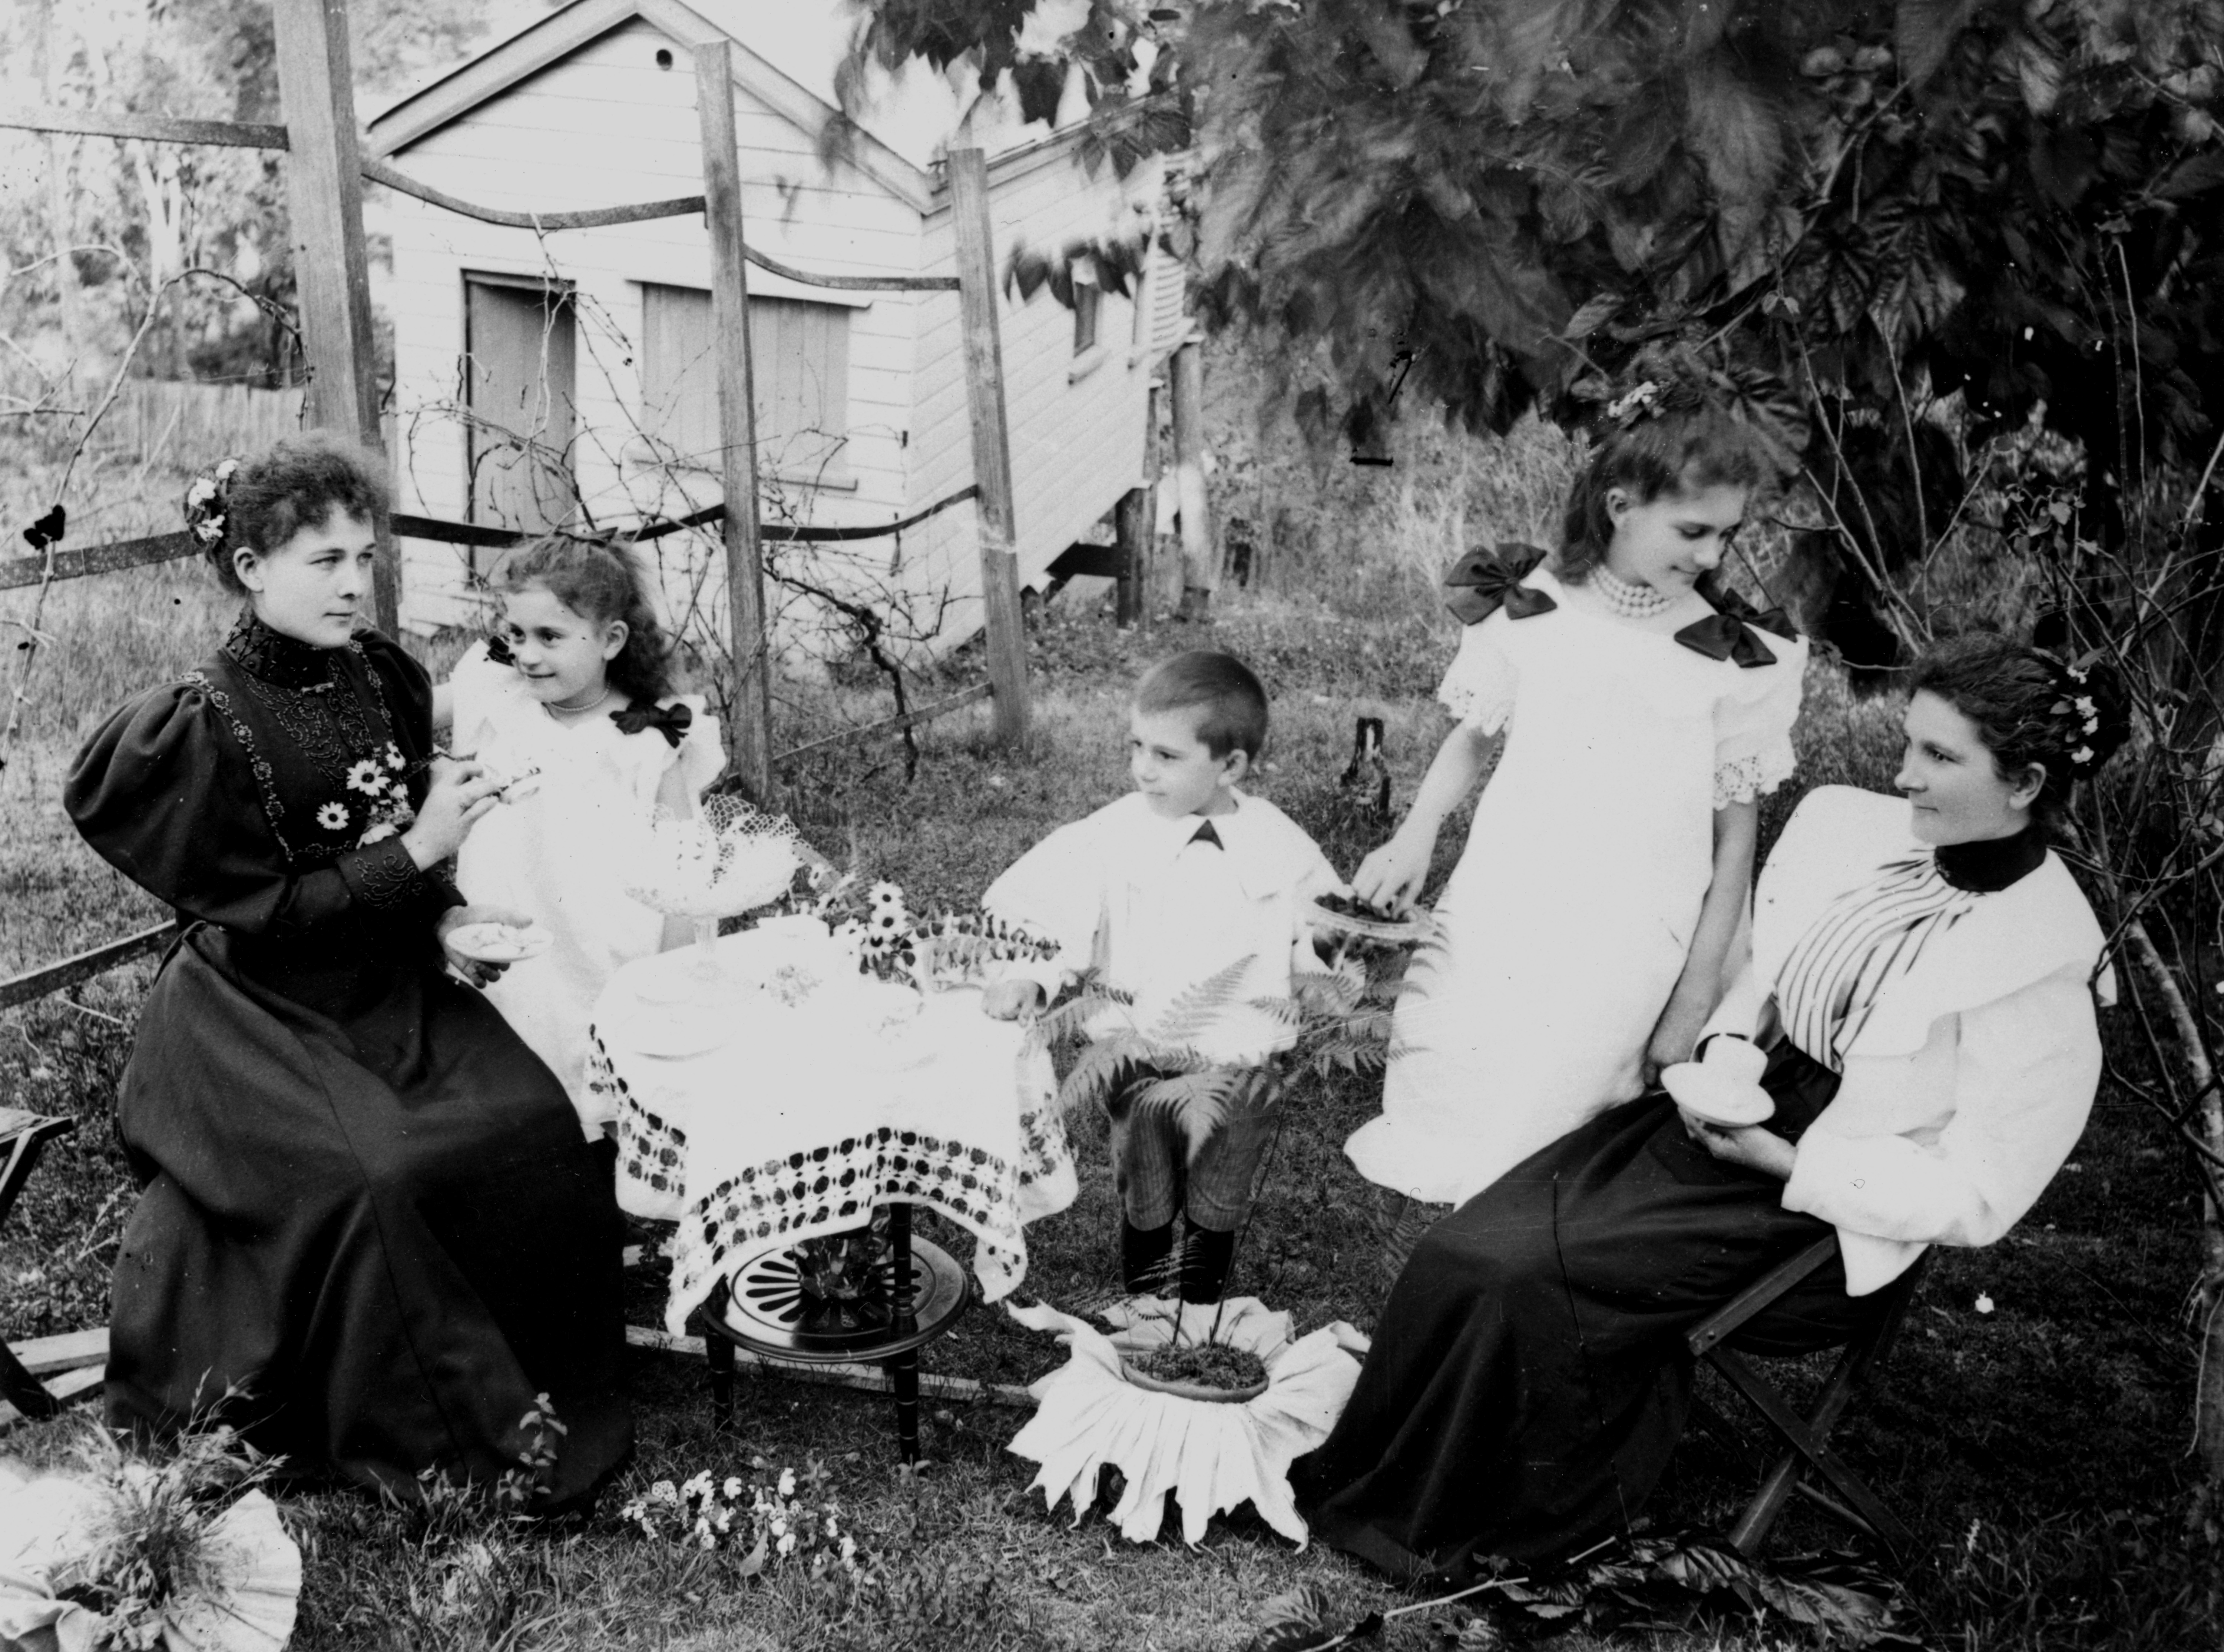 Taking tea in the garden, 1890s, Photographer: Unidentified, John Oxley Library, State Library of Queensland. Negative number: 43999.